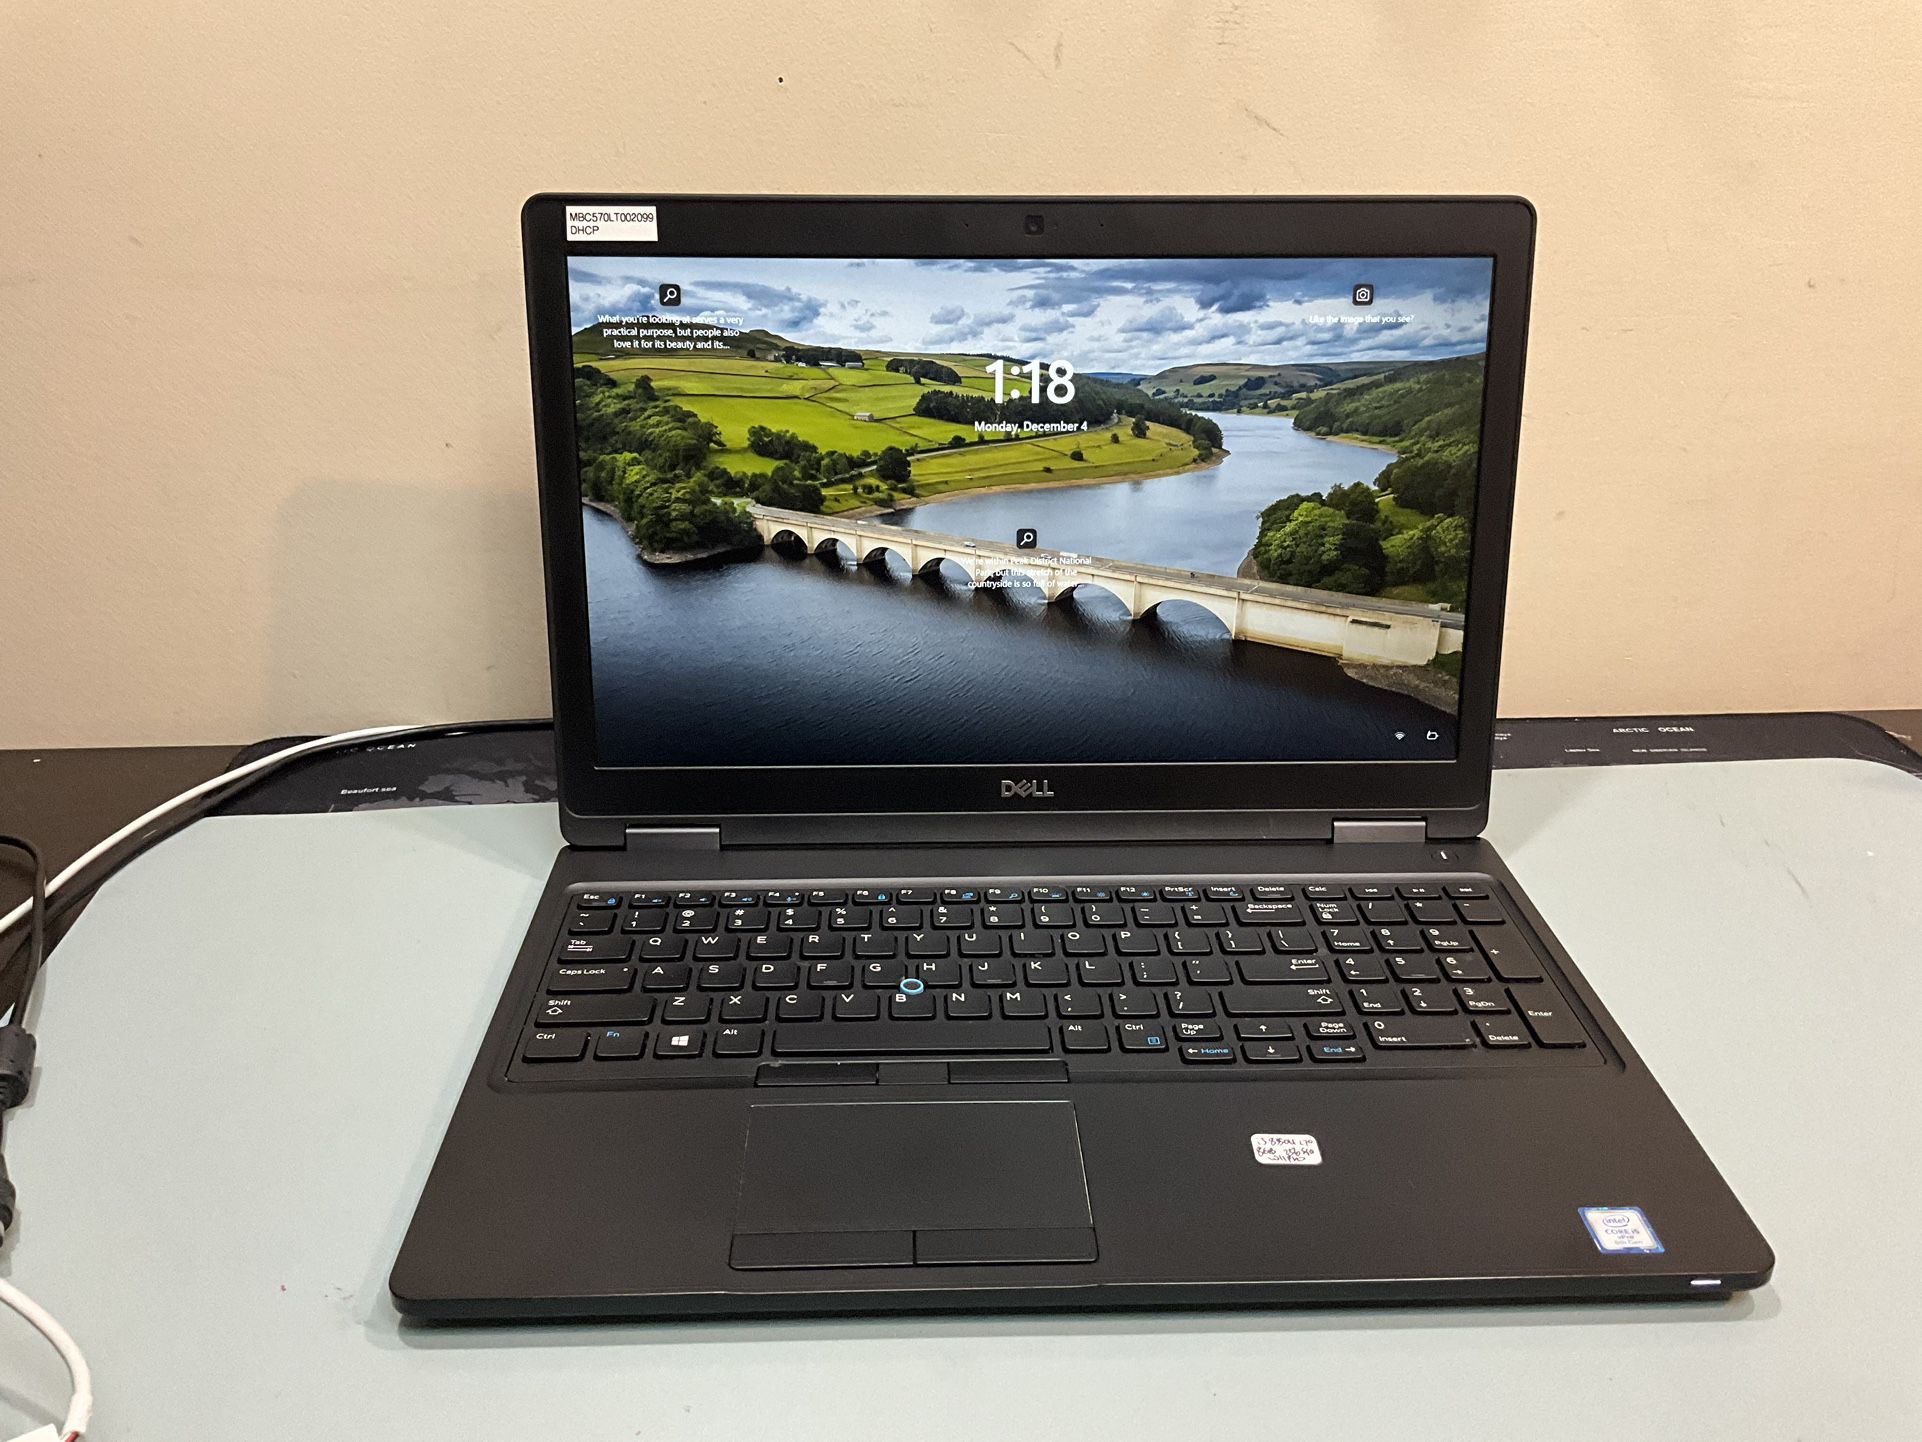 Dell Latitude 5590 Laptop 15.6" i5-8th gen windows 11 pro .  Good working 8th Gen processor in Dell Latitude laptop - have some scratches  from normal